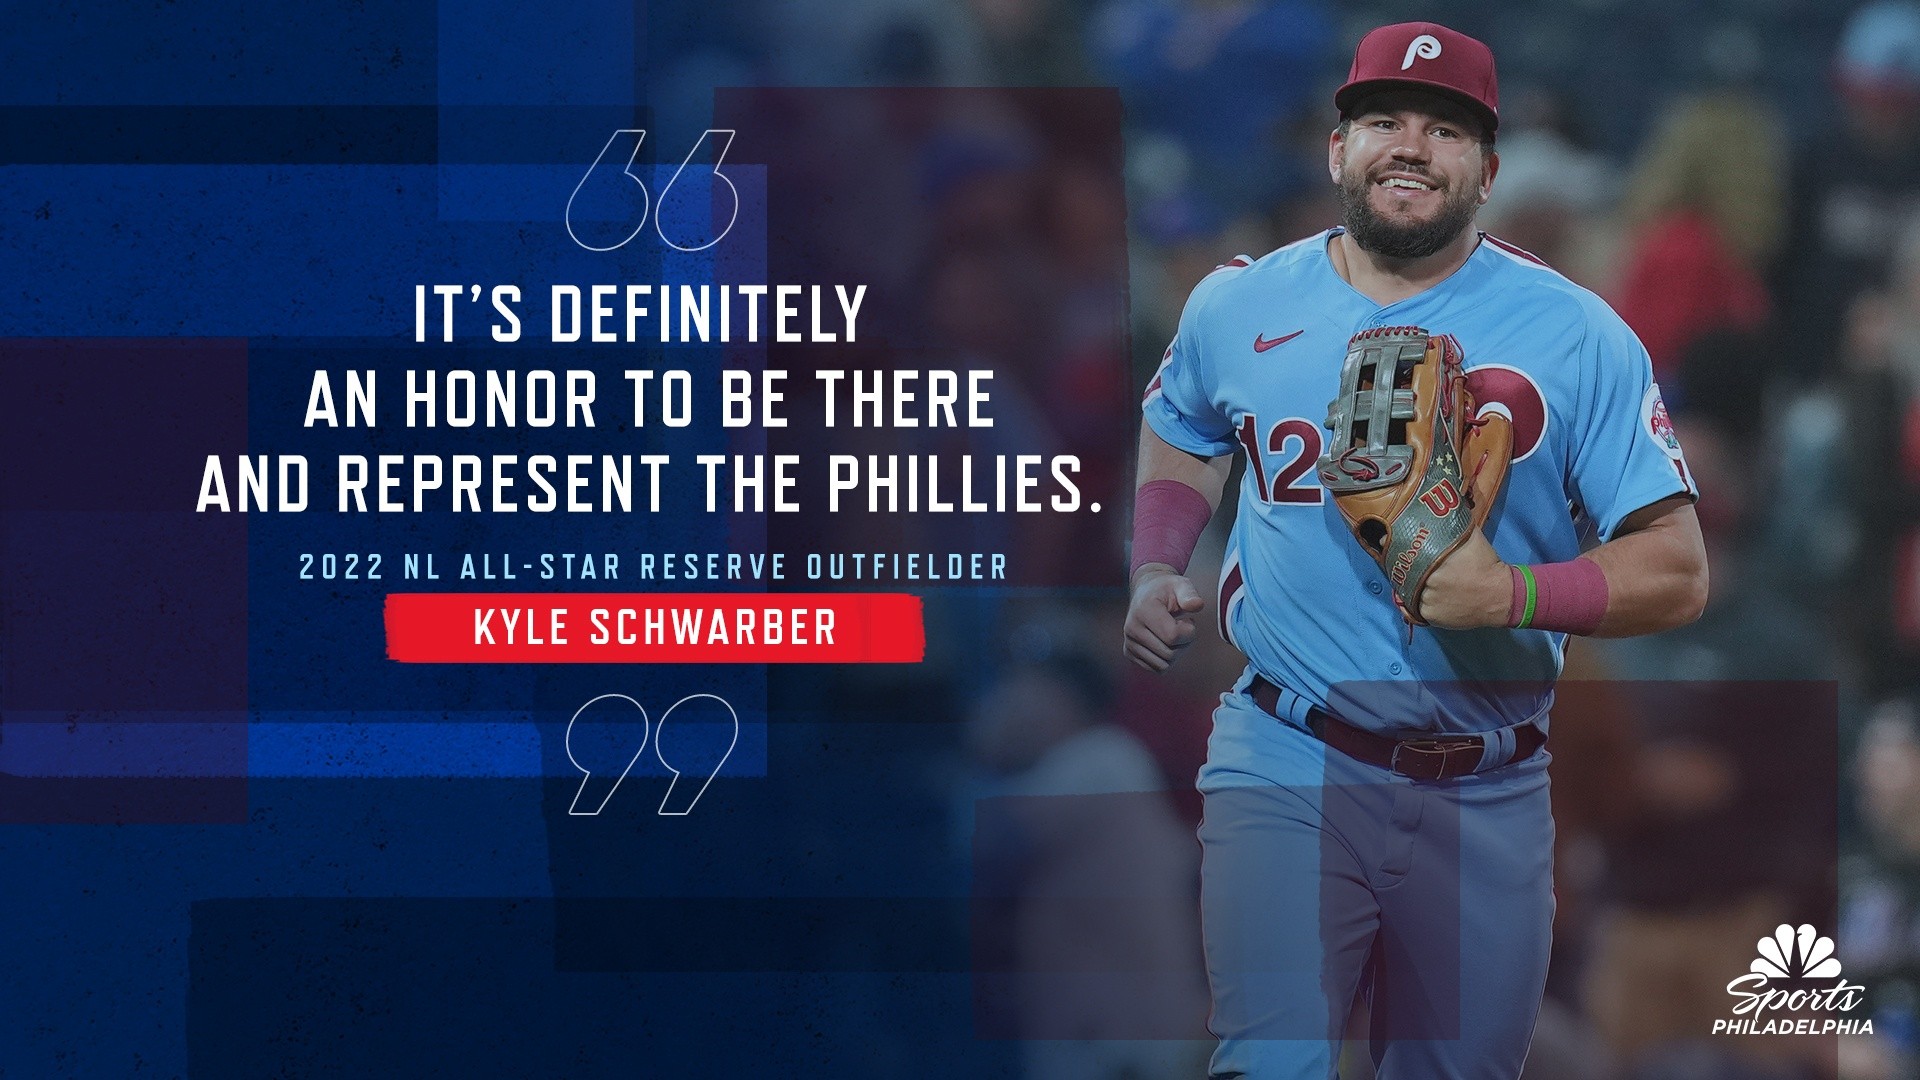 Phillies' Kyle Schwarber reacts to 2022 MLB All-Star selection